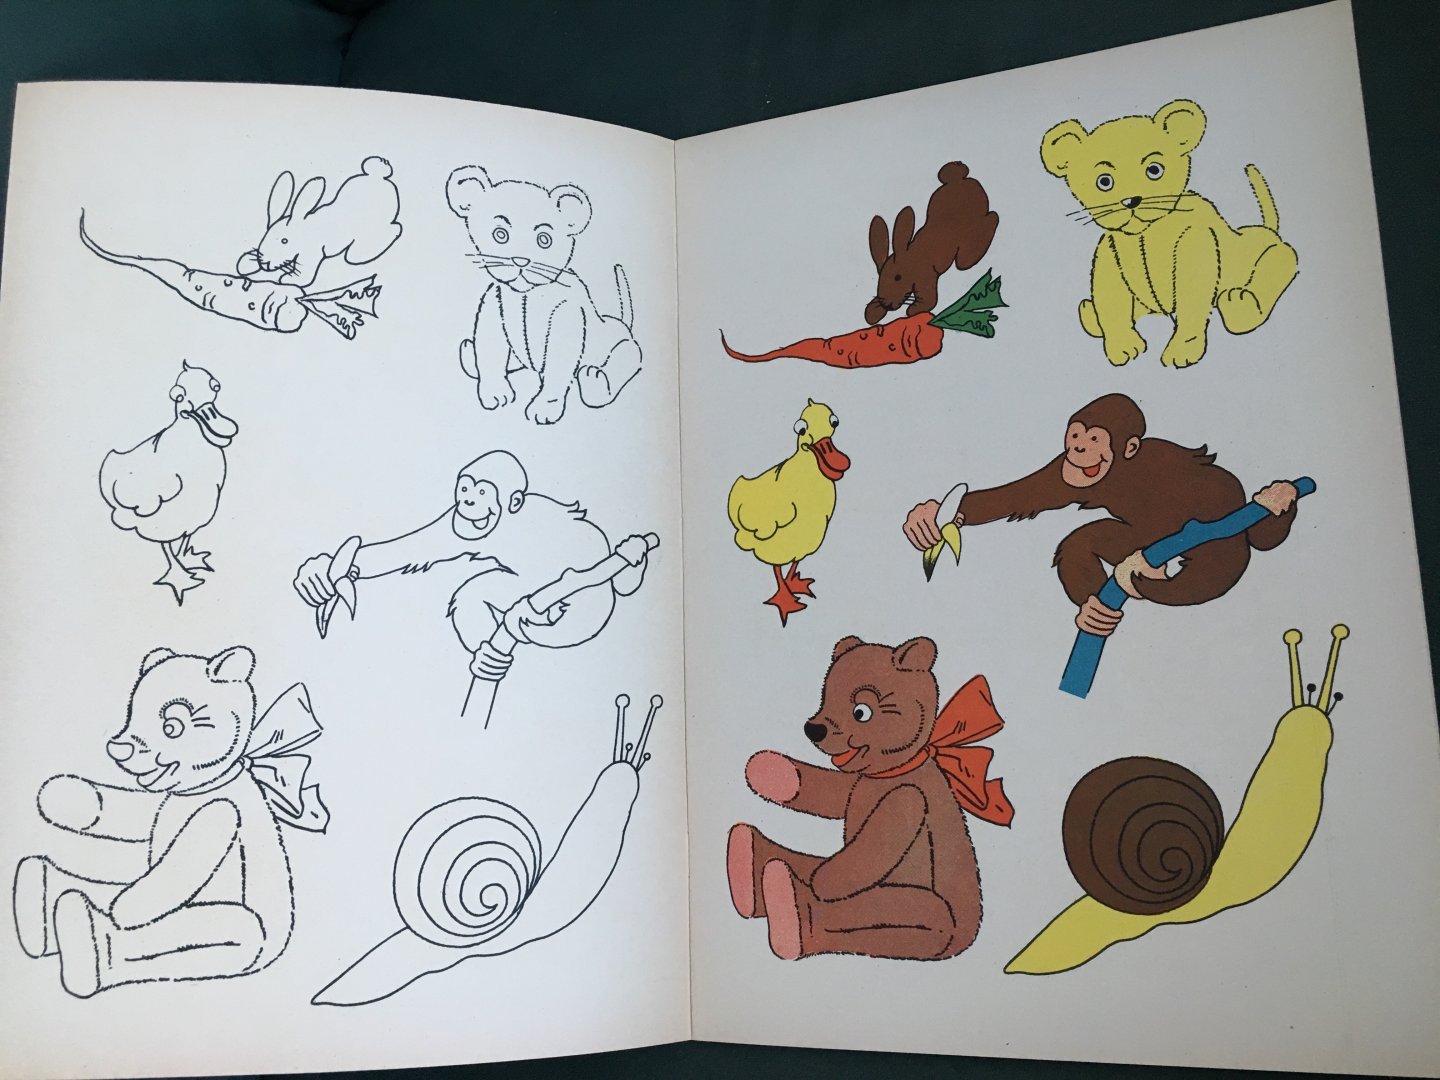  - Animal  Drawings. Blue colouring book where a girl is colouring a chicken and a boy an elephant